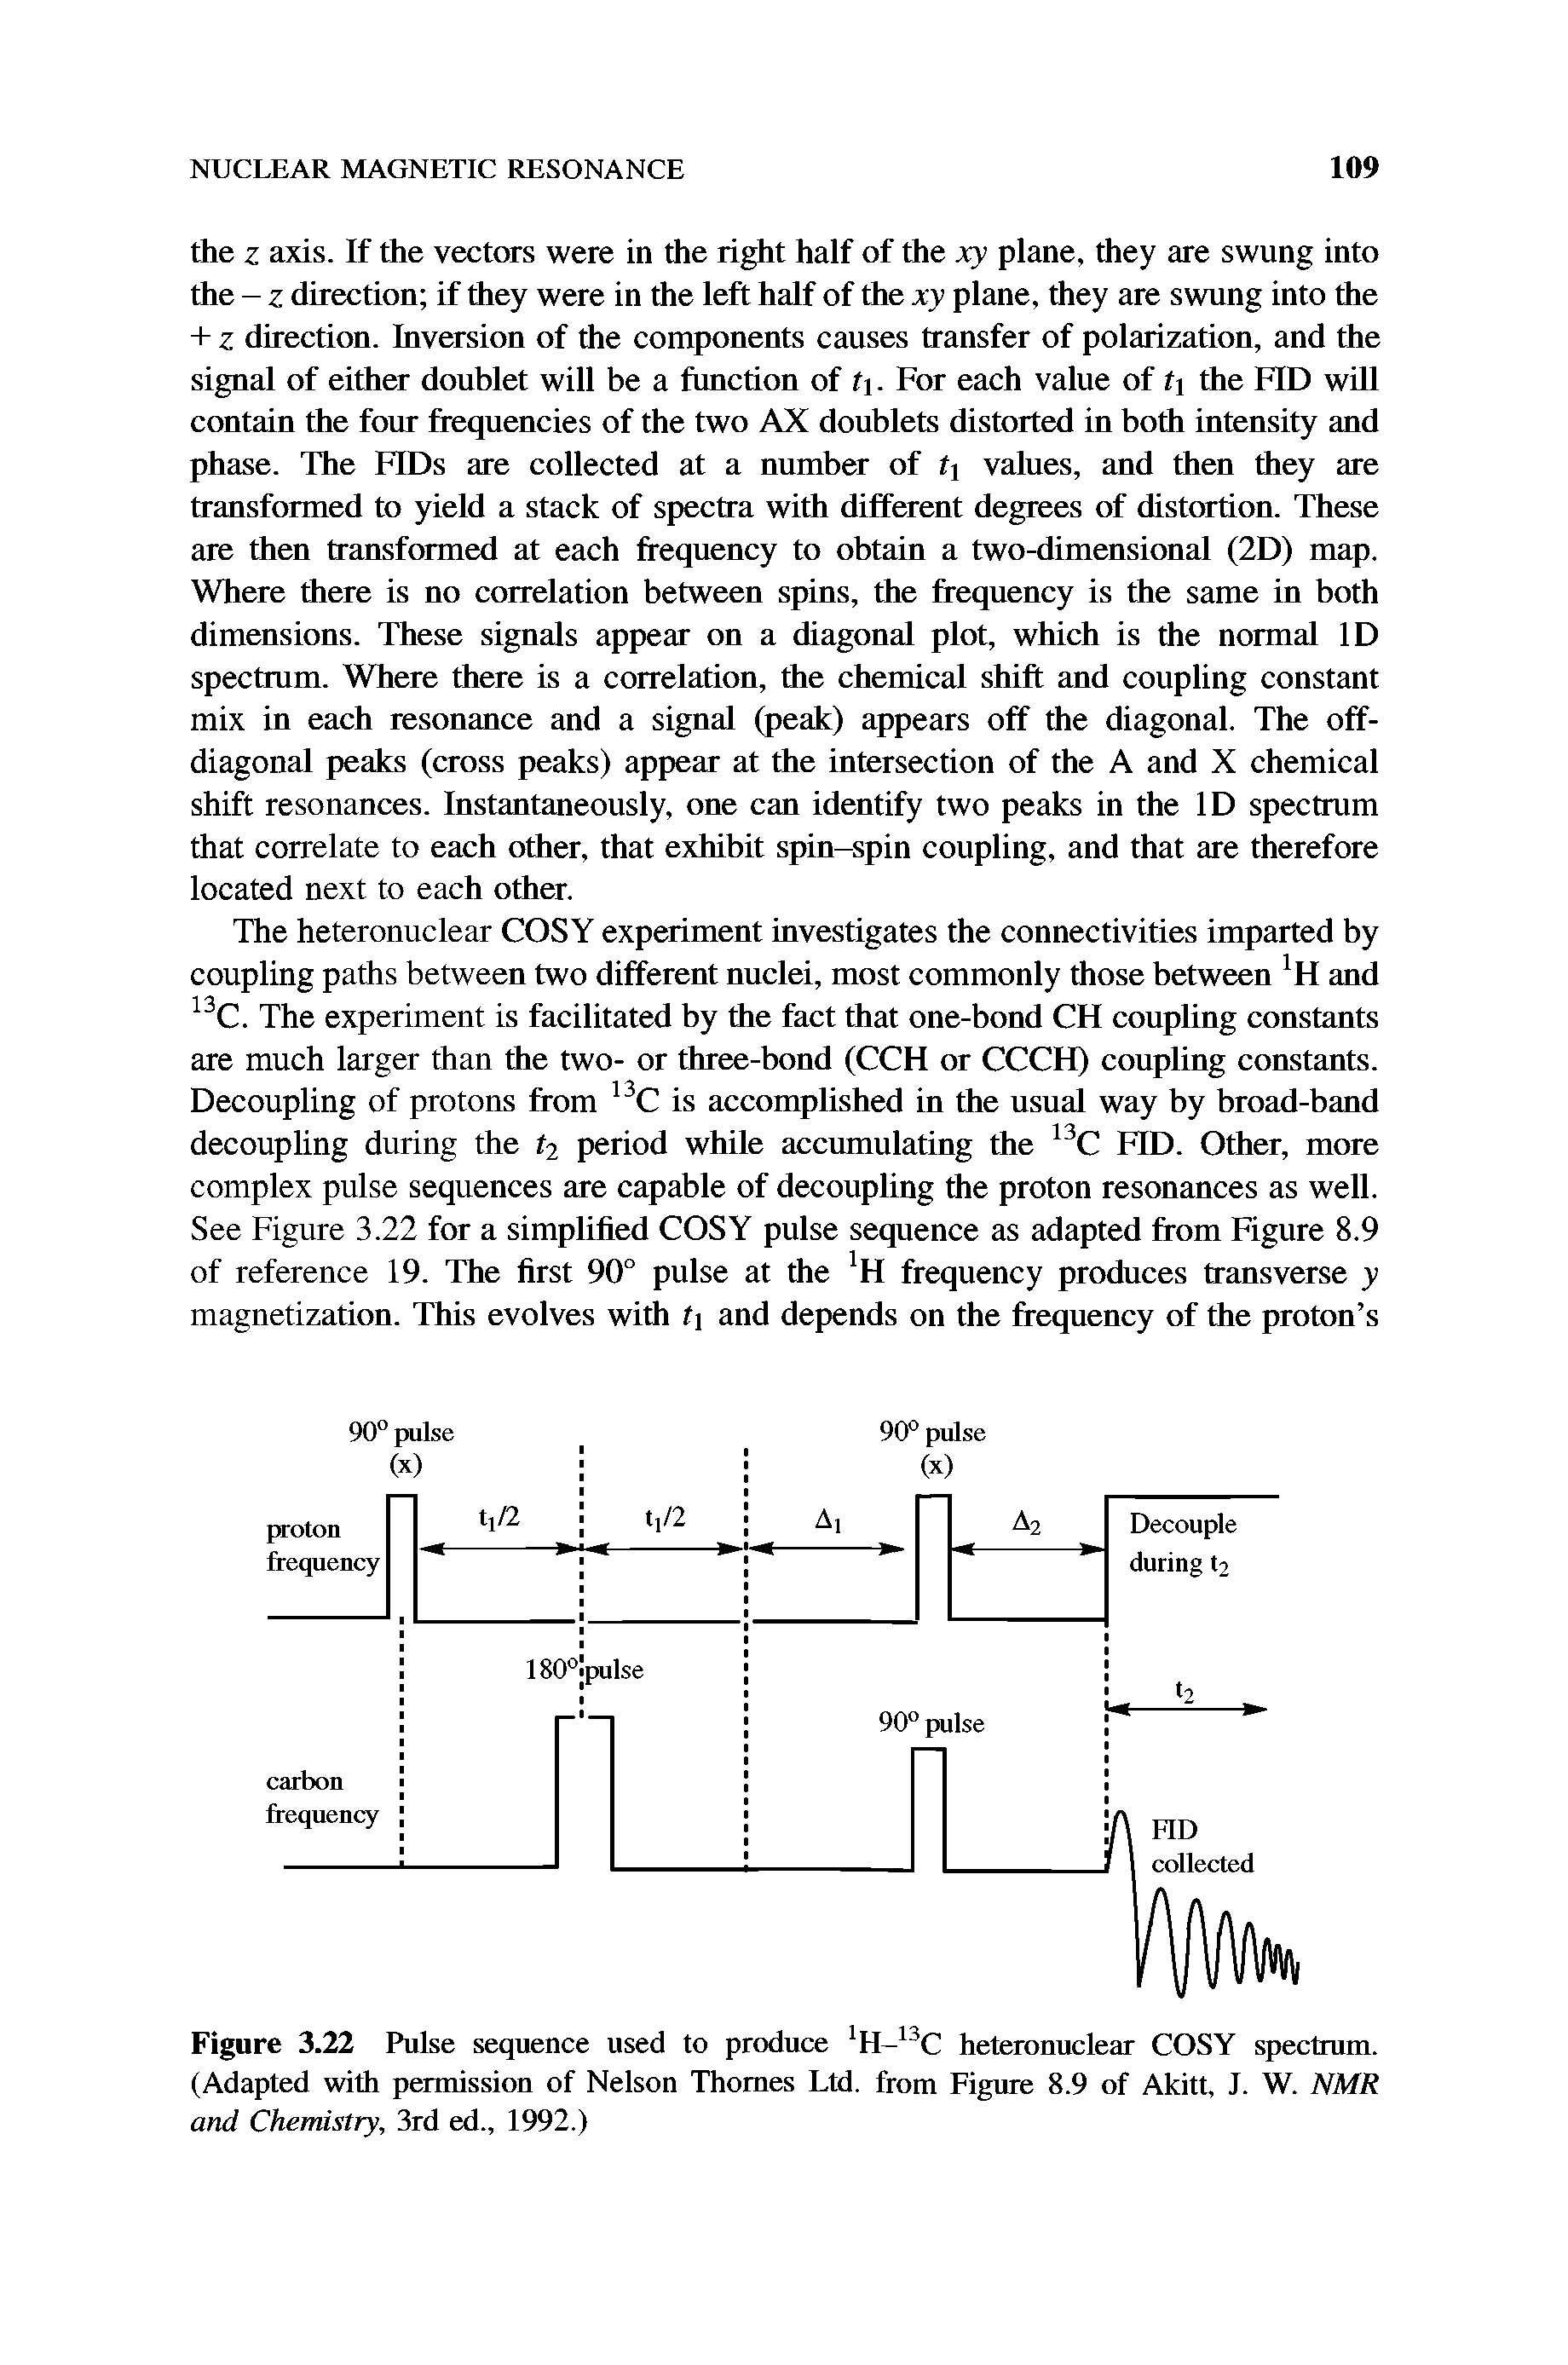 Figure 3.22 Pulse sequence used to produce 1H-I3C heteronuclear COSY spectrum. (Adapted with permission of Nelson Thornes Ltd. from Figure 8.9 of Akitt, J. W. NMR and Chemistry, 3rd ed., 1992.)...